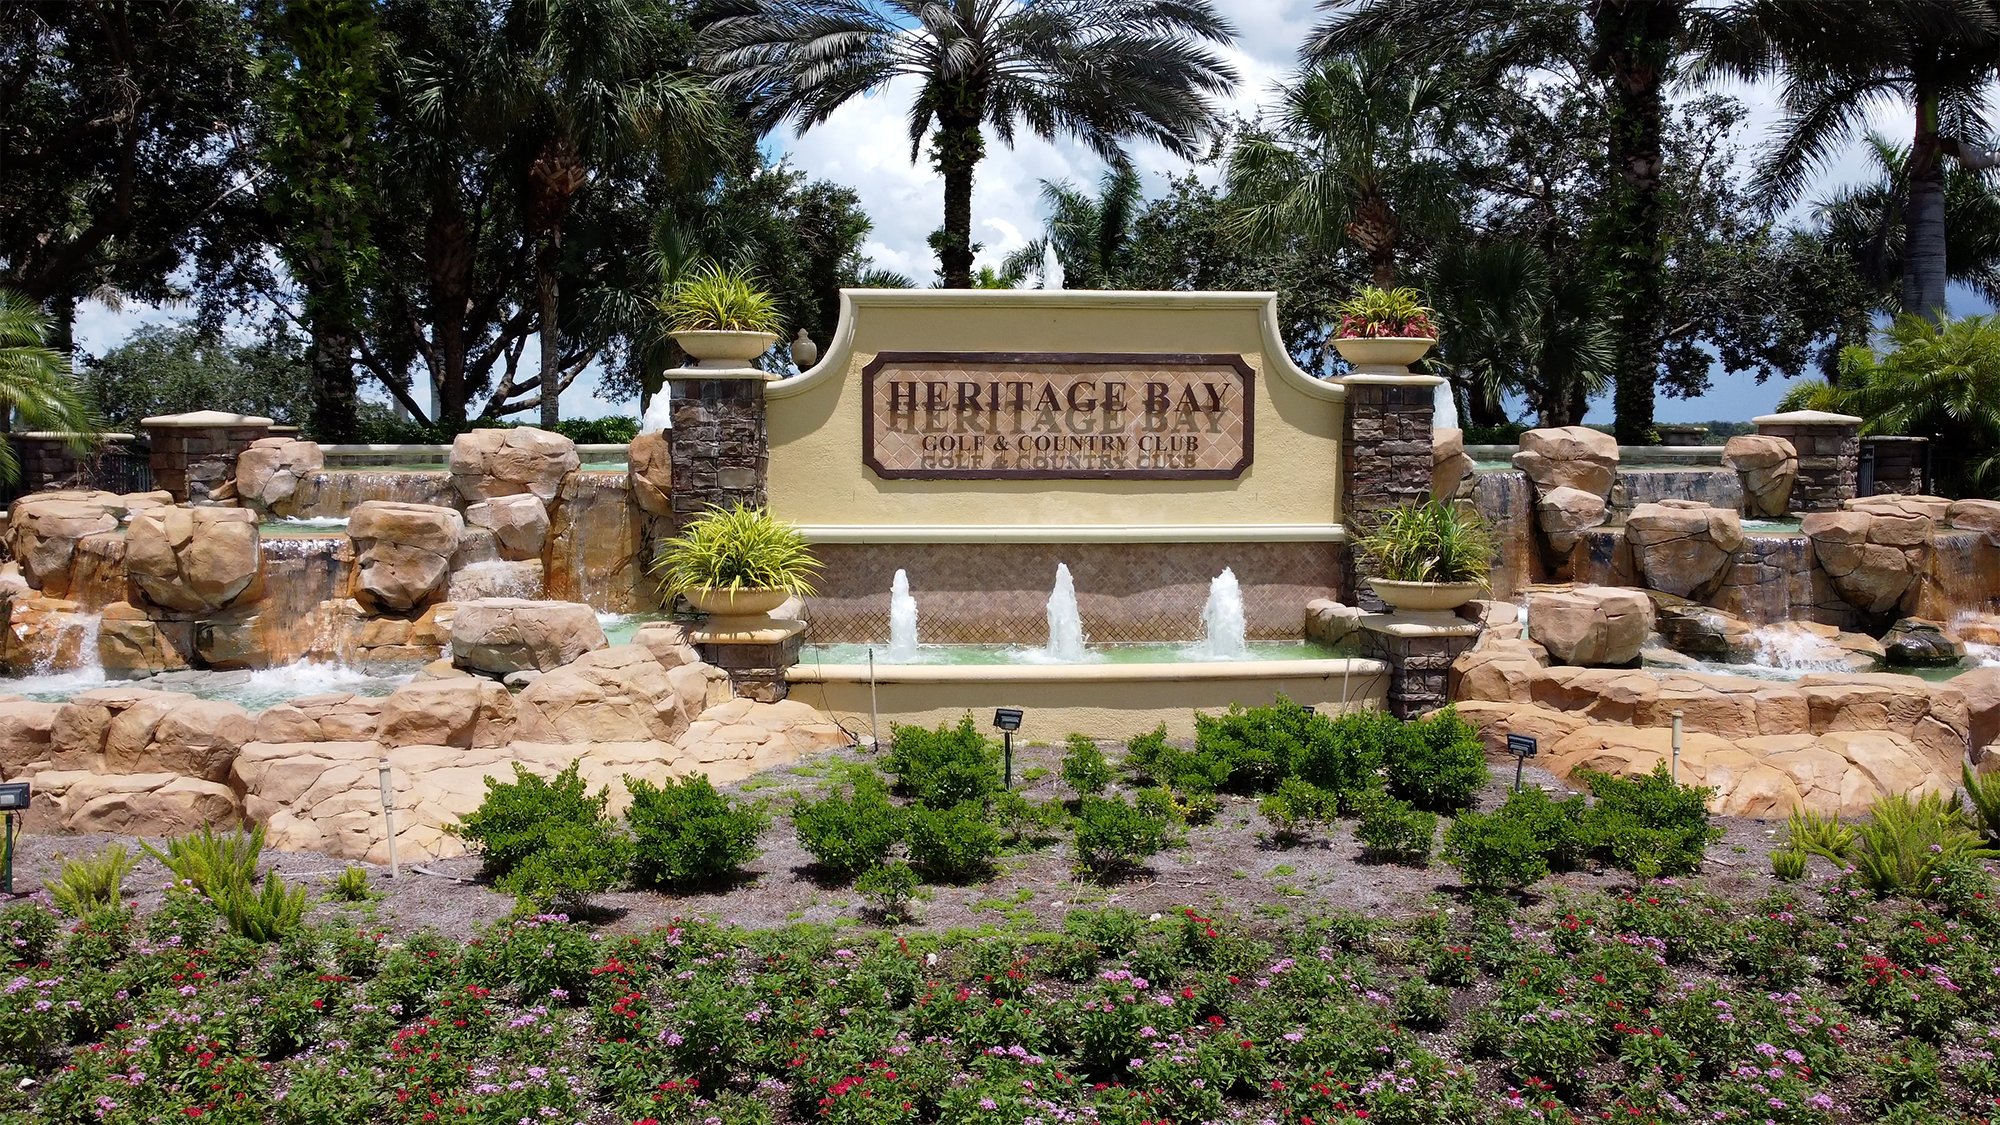 Heritage  Bay Golf and Country Club Entry Monument.jpeg